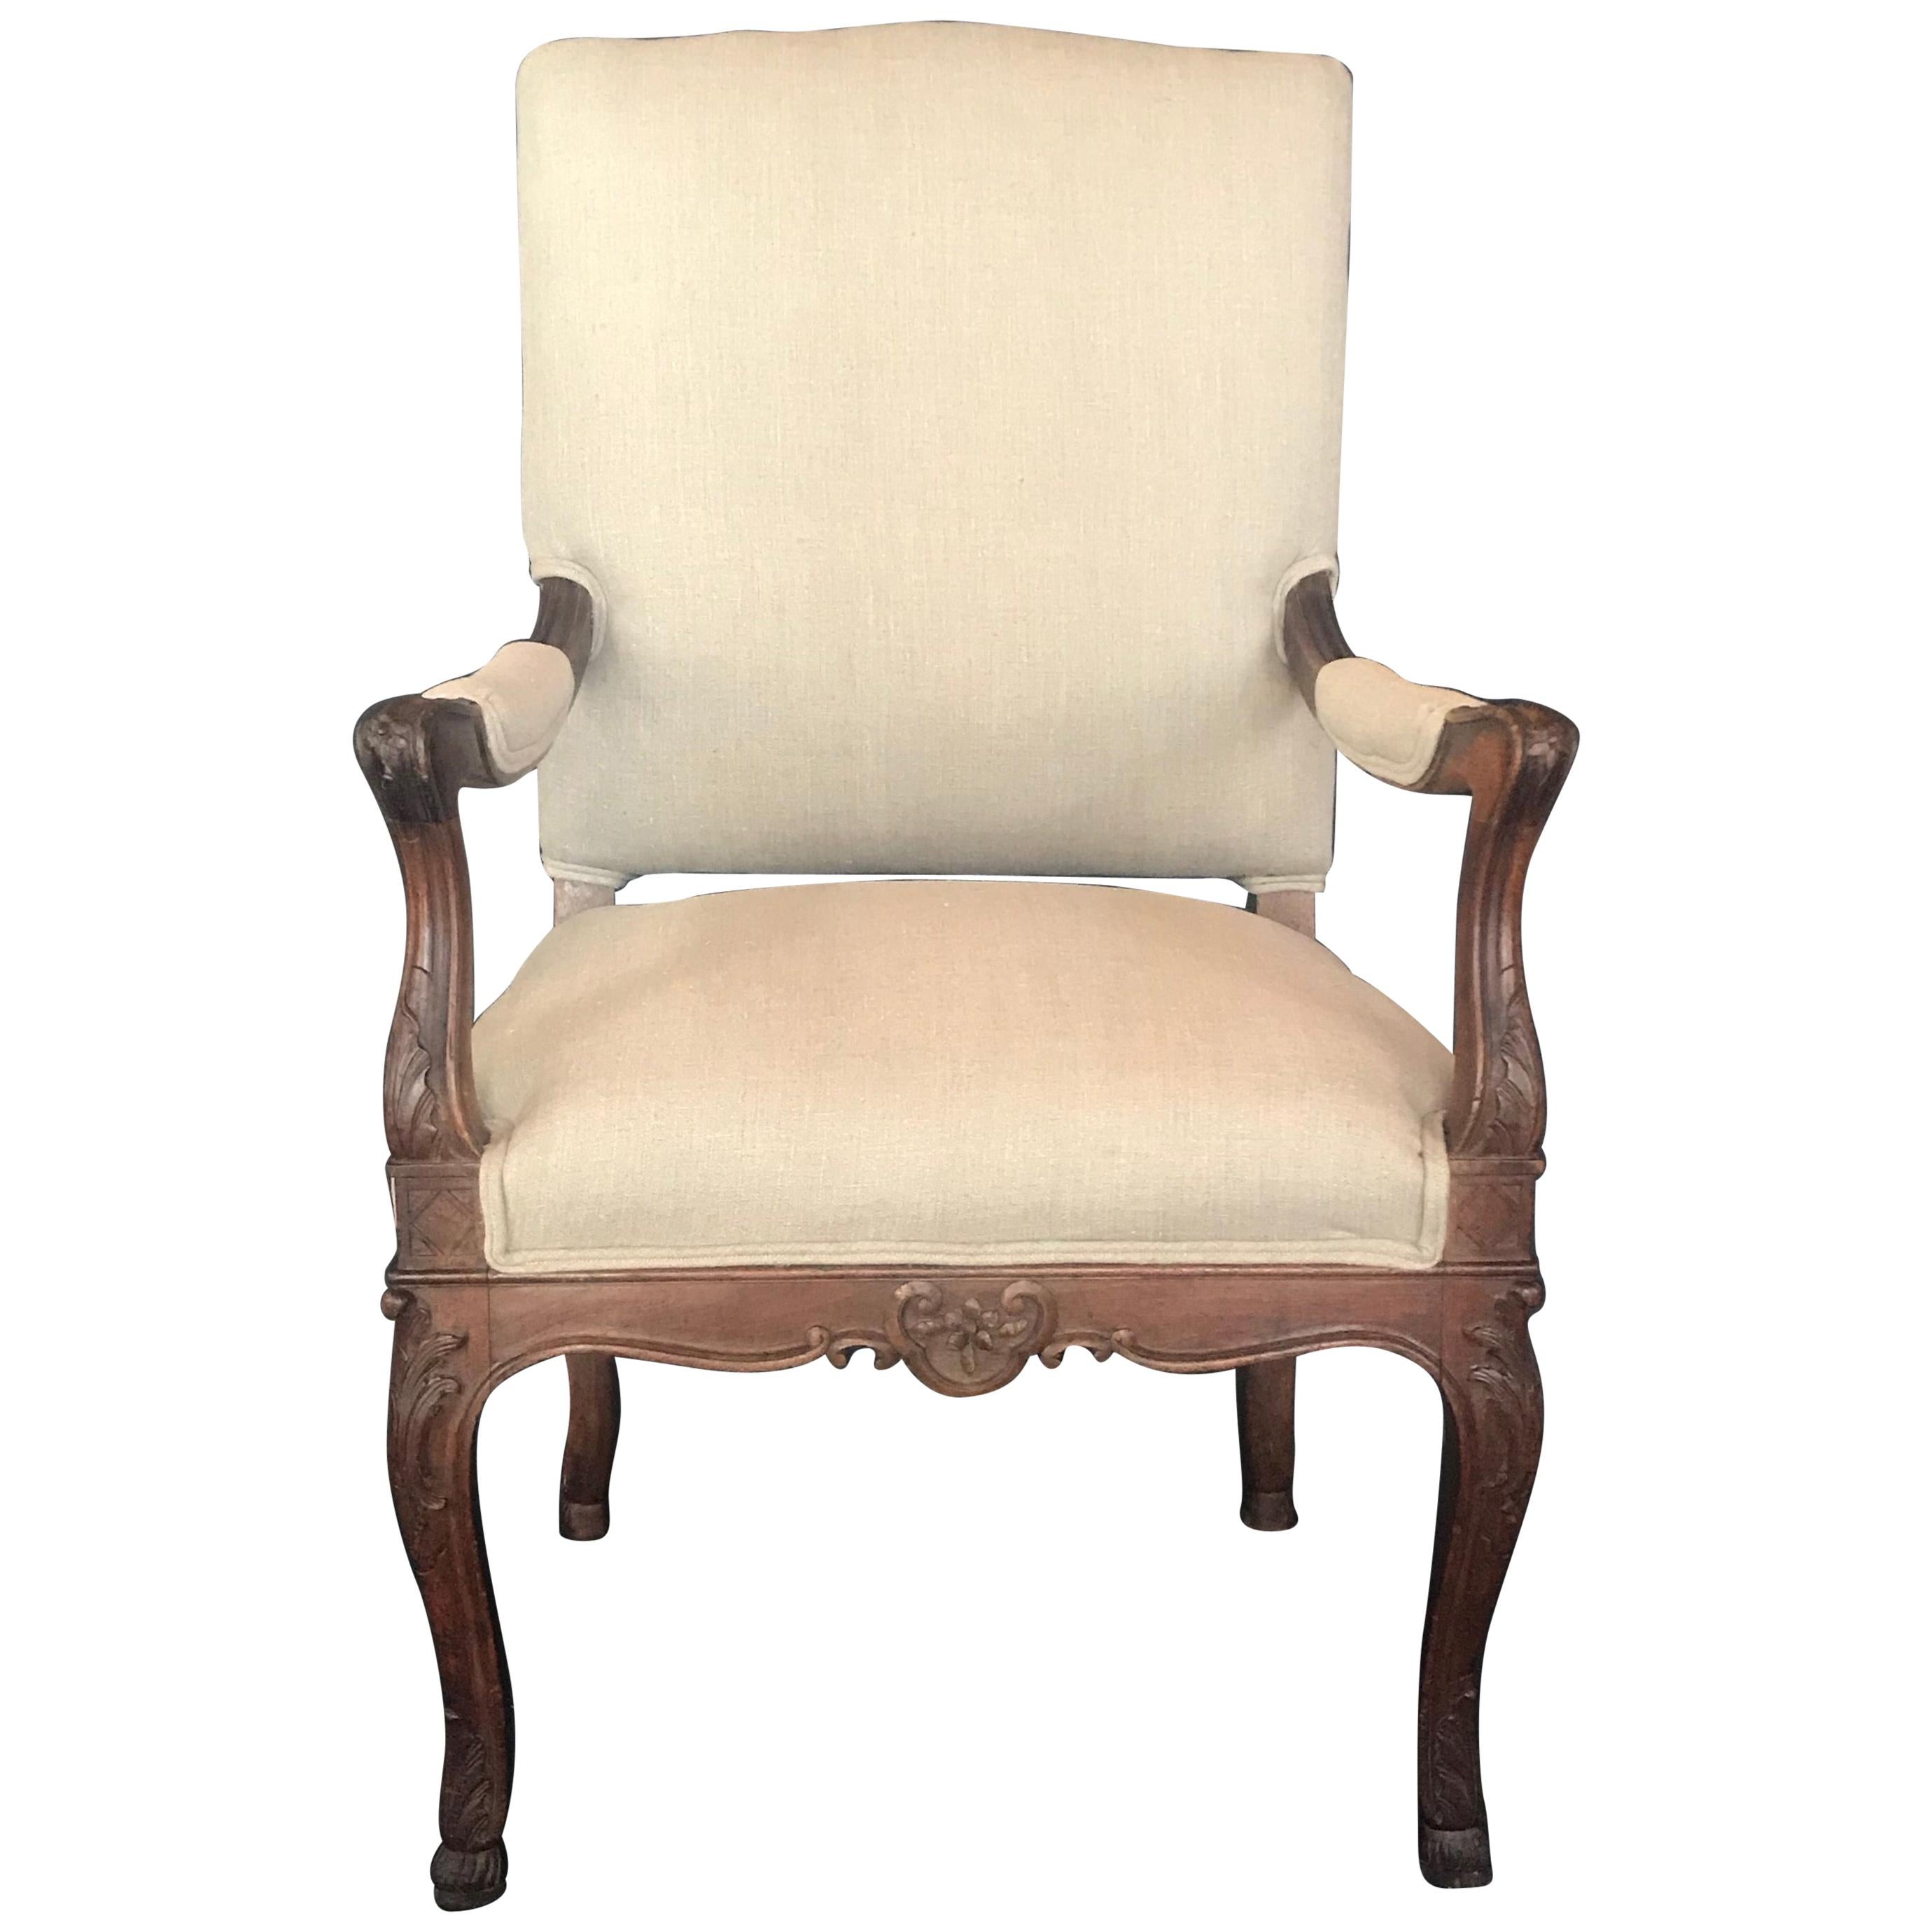 19th Century French Carved Regency Style Walnut Chair with Scrolled Arms For Sale